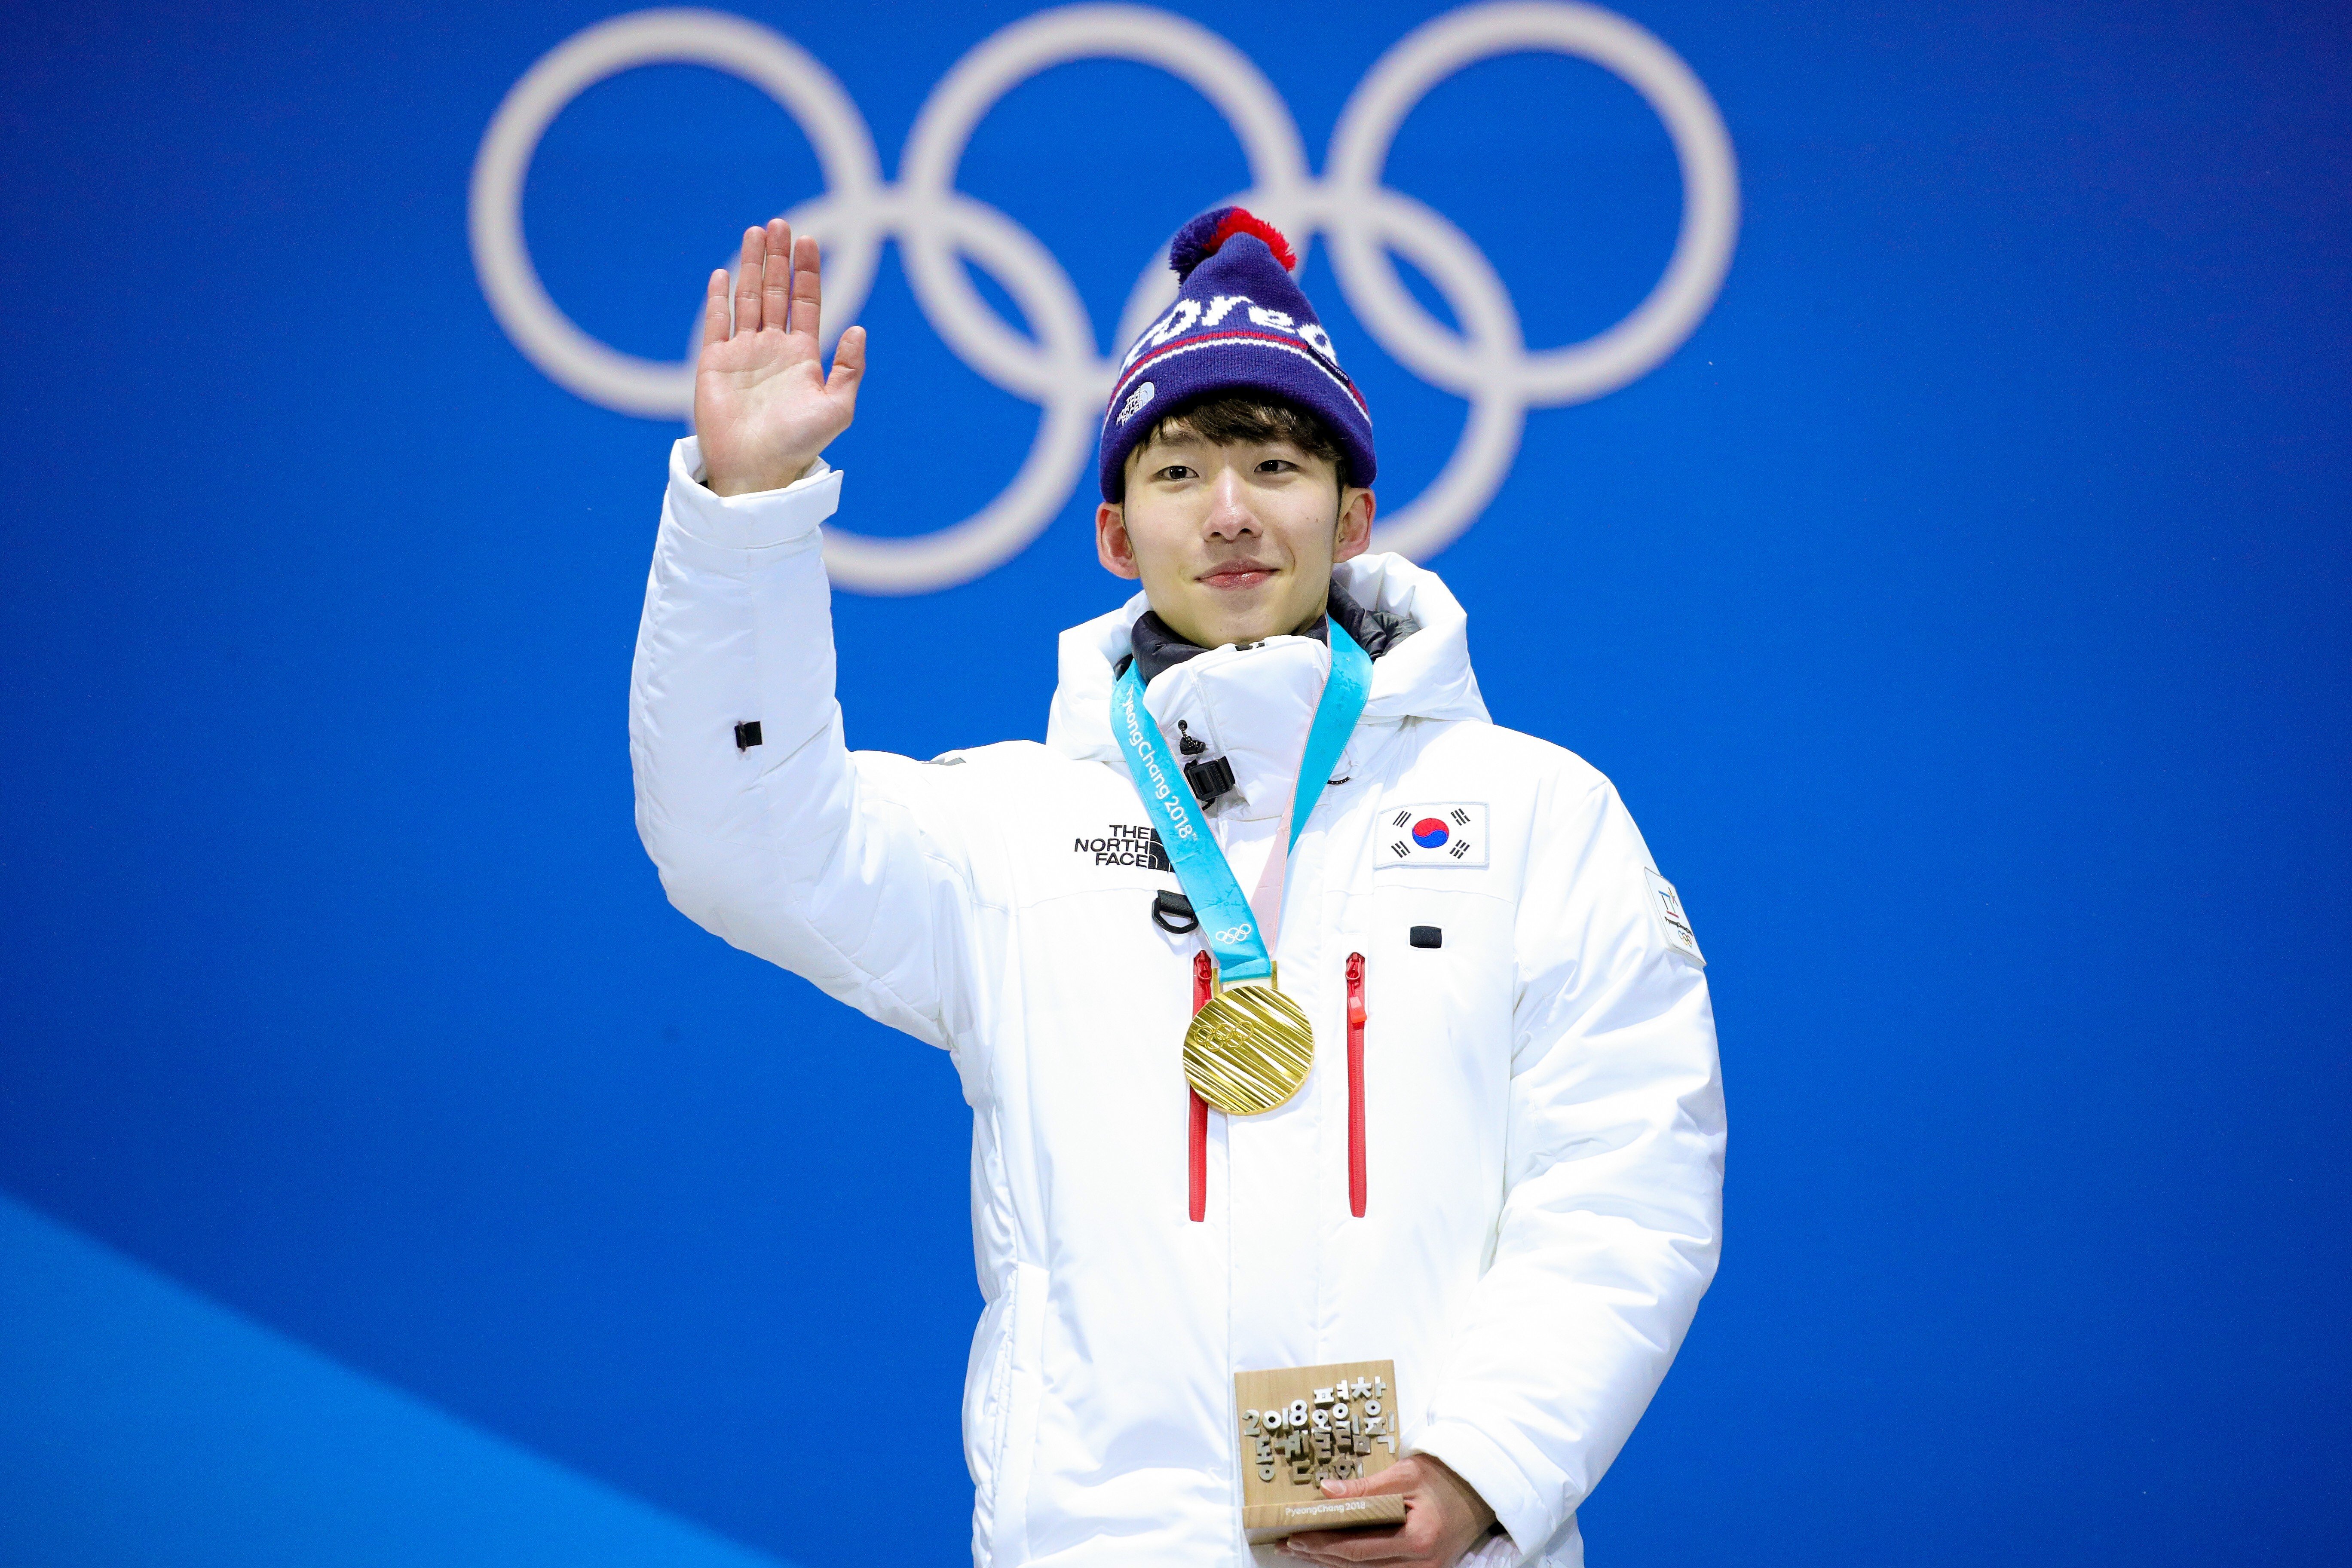 Gold medallist Lim Hyo-jun of South Korea celebrates on the podium during the medal ceremony for the men‘s short track 1,500m at the Pyeongchang 2018 Winter Olympic Games. Photo: Getty Images